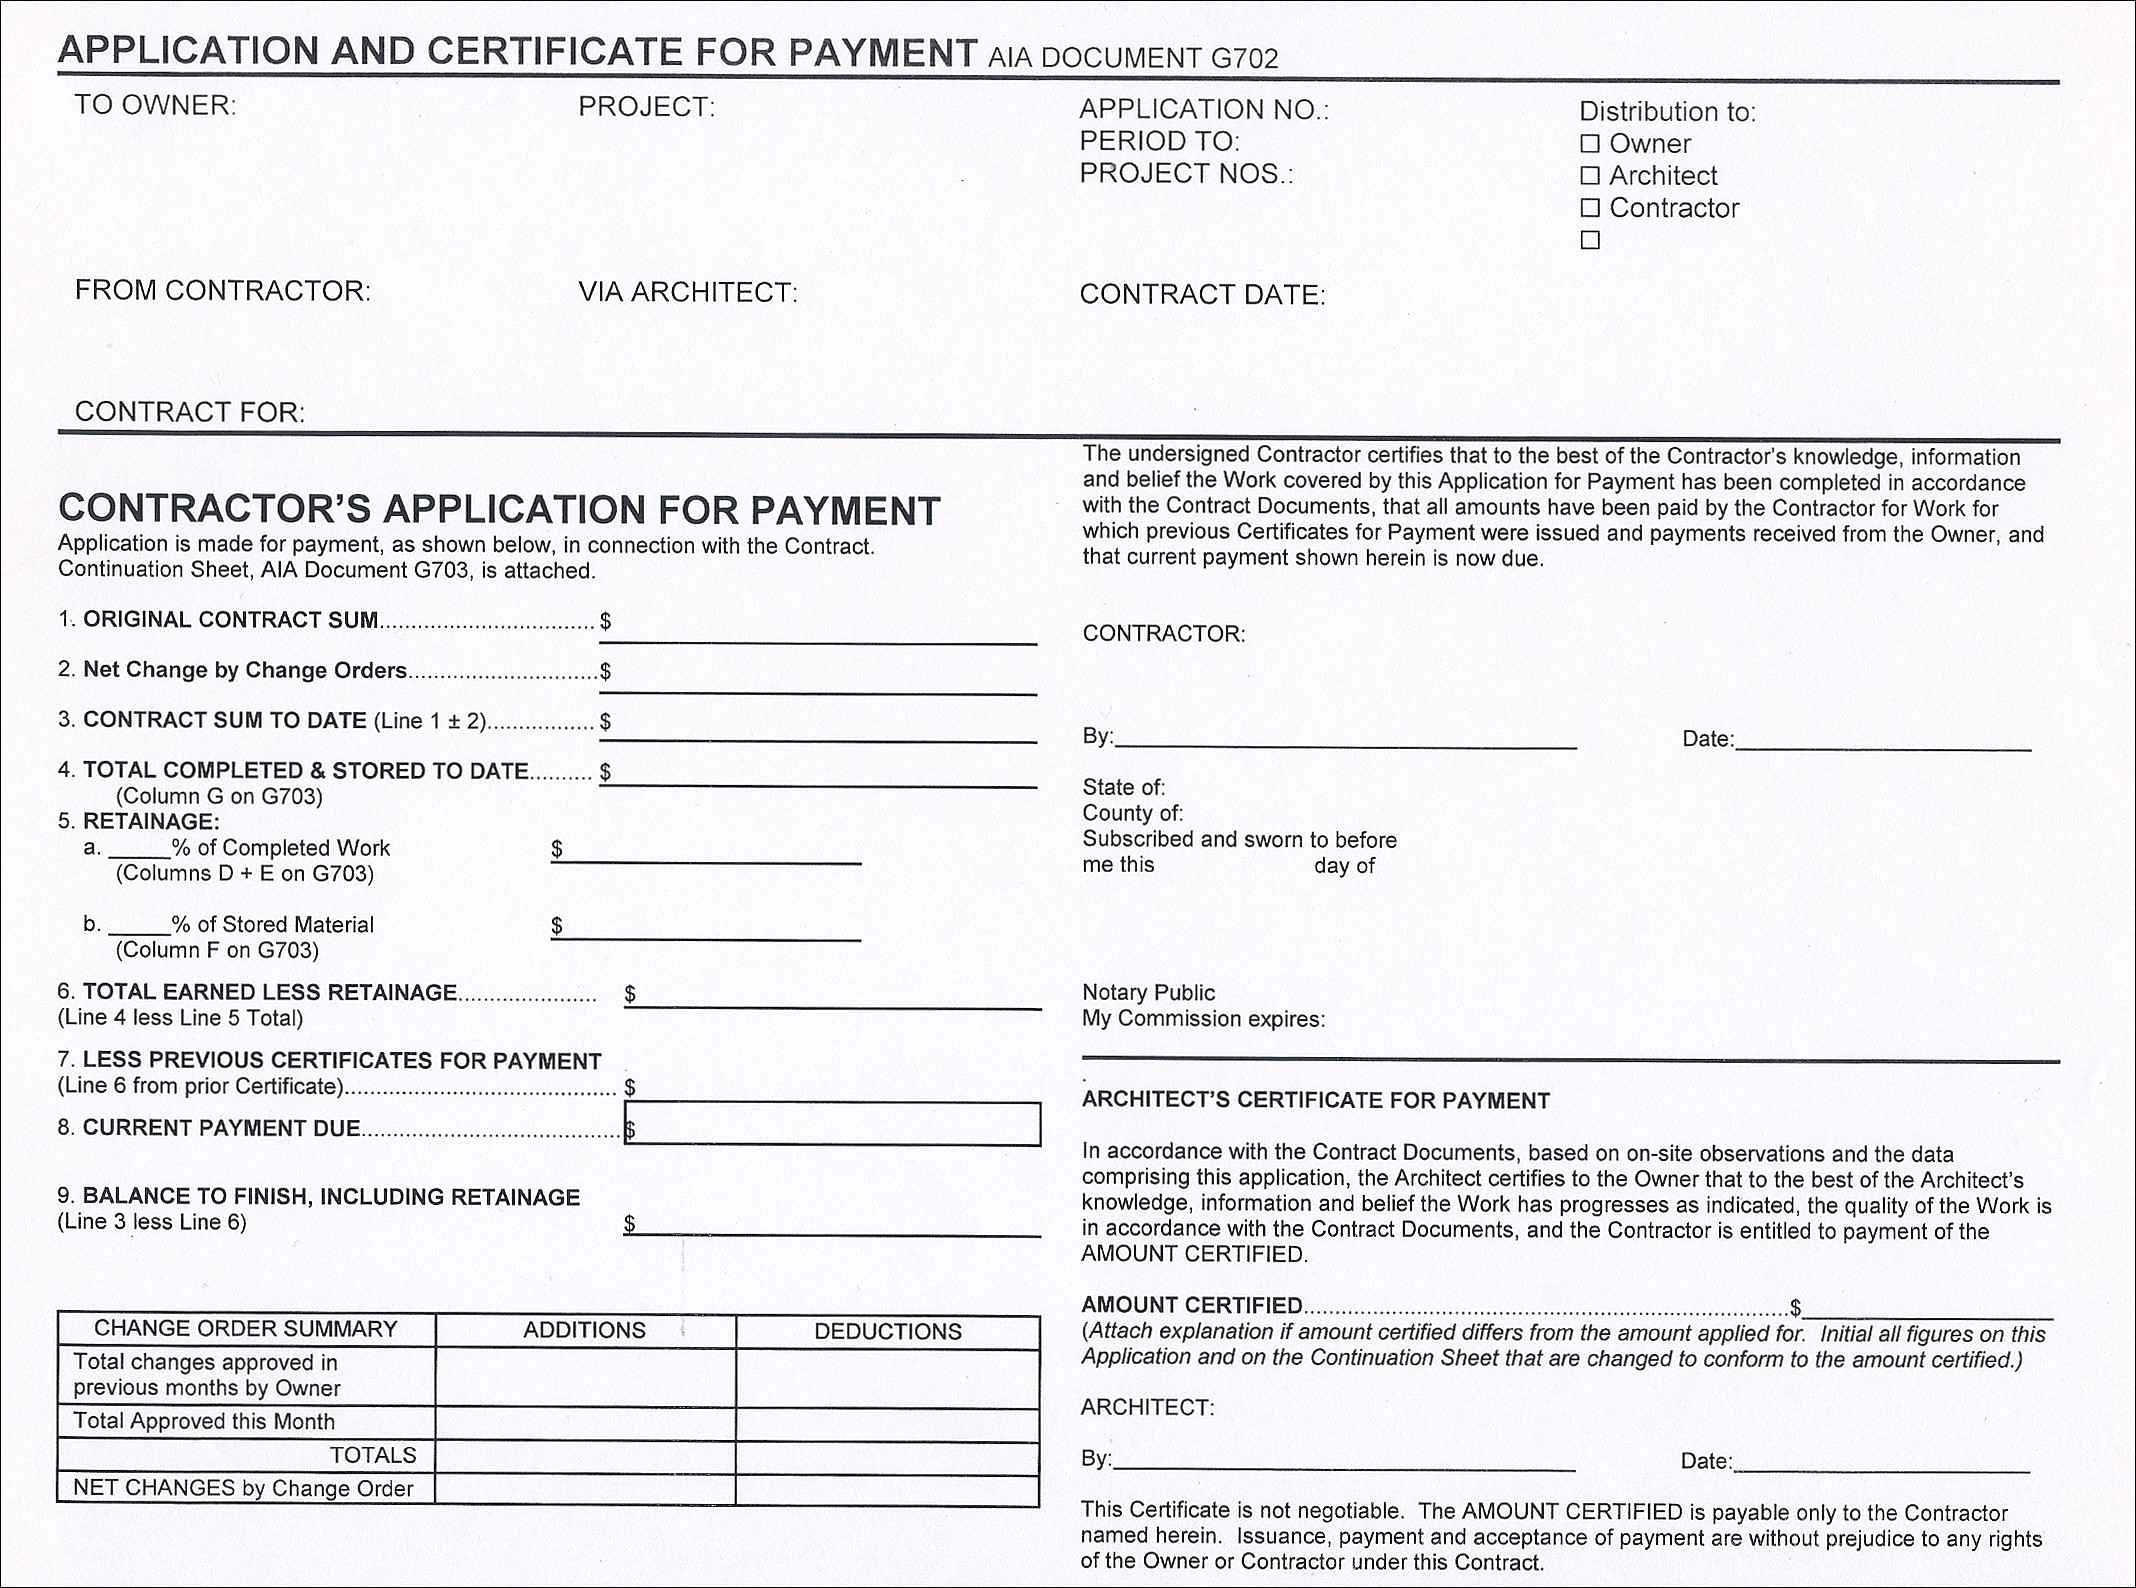 Subcontractor Payment Certificate Template Excel Of 1 On 4 For Certificate Of Payment Template